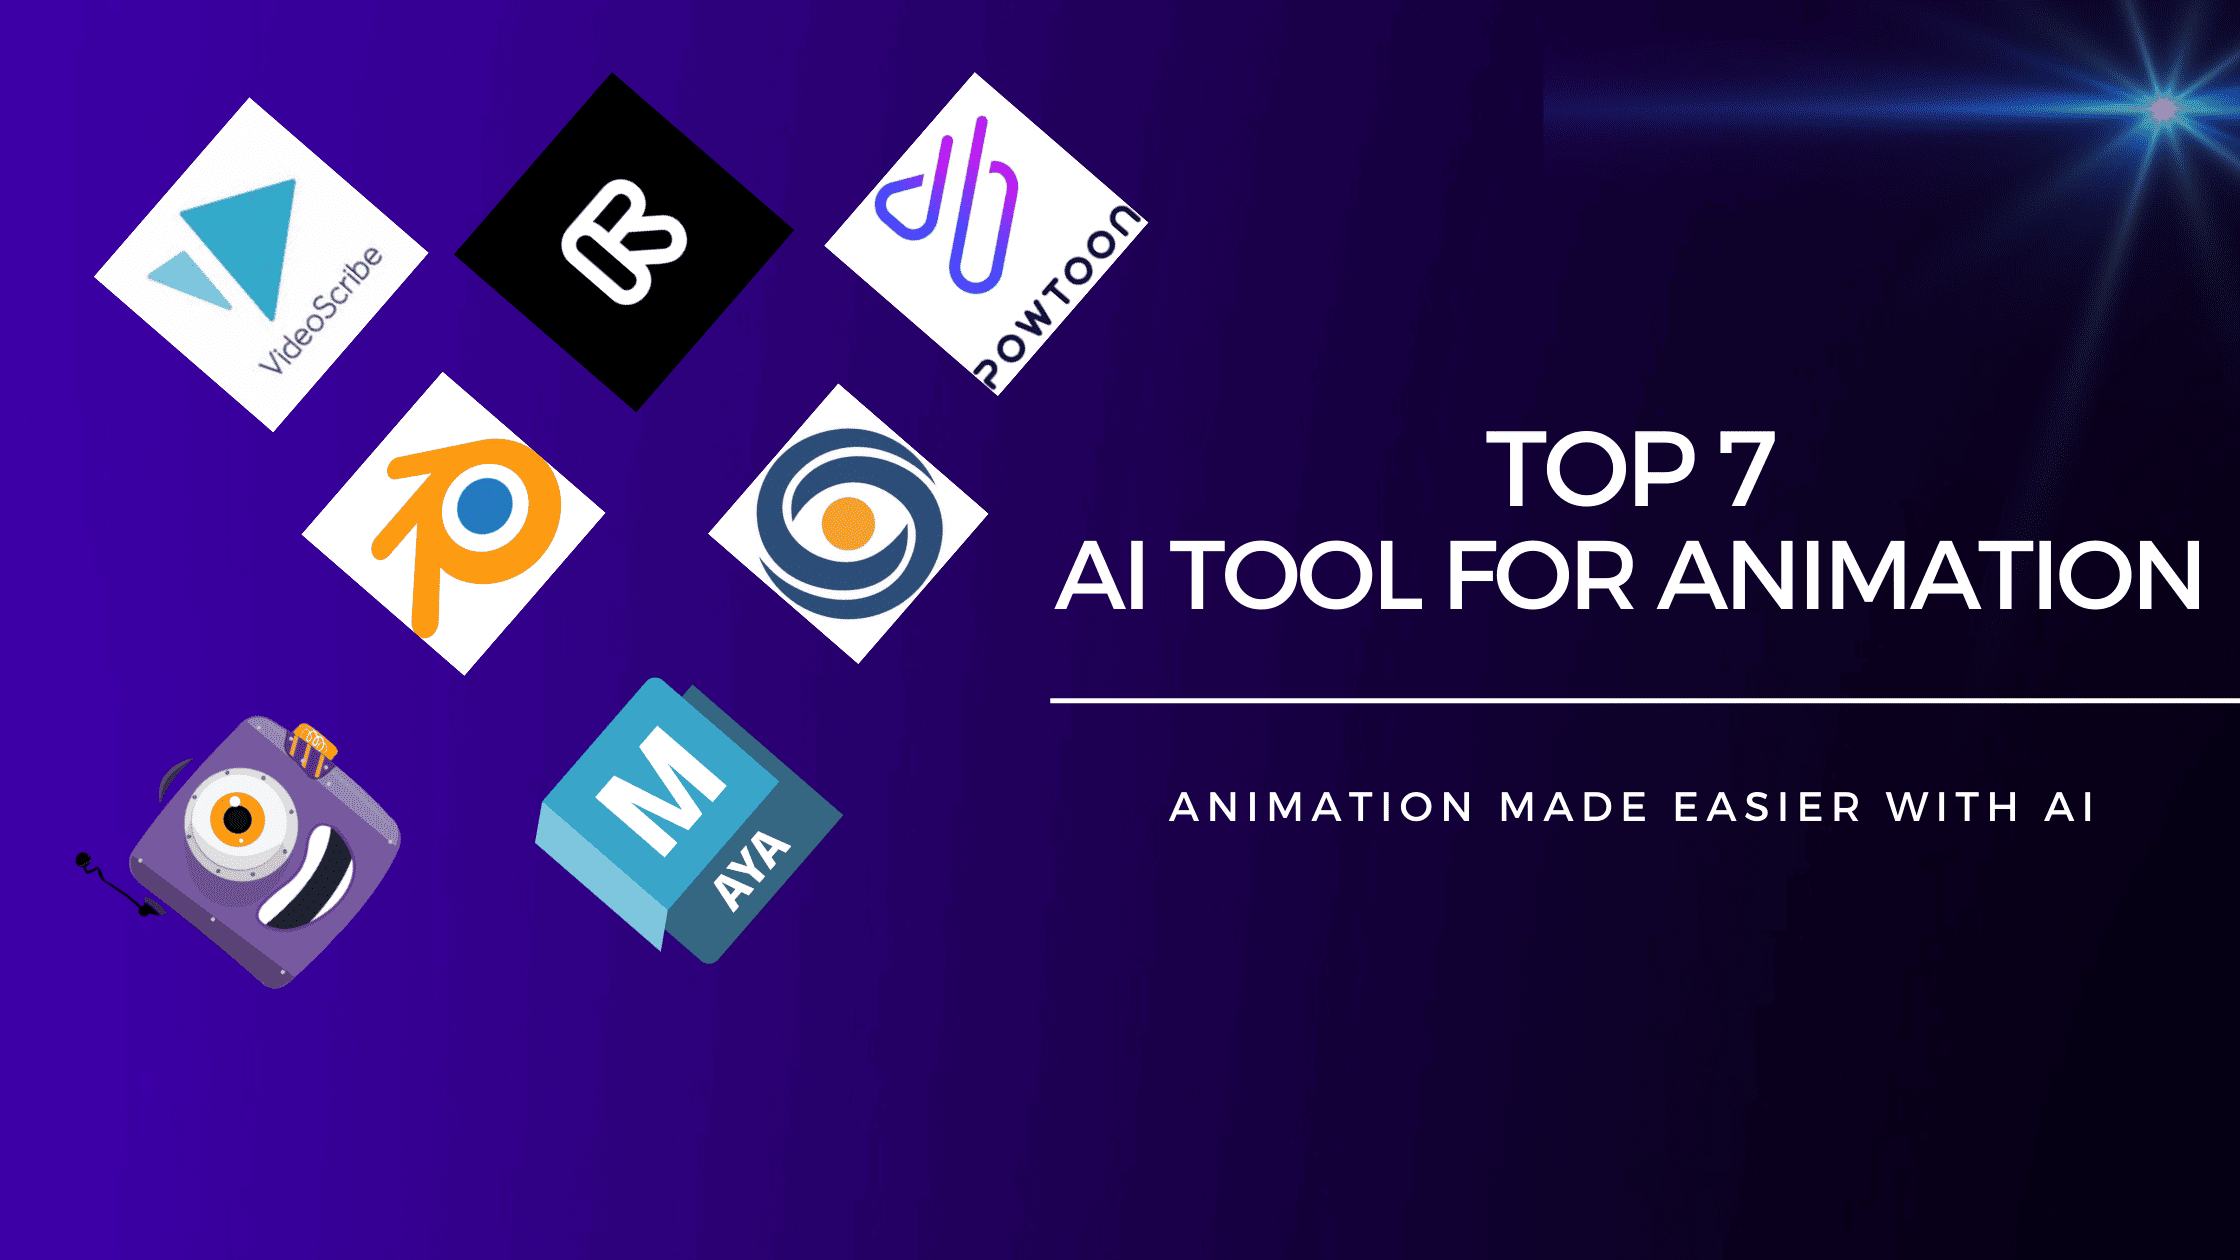 Top 7 AI Tool for animation